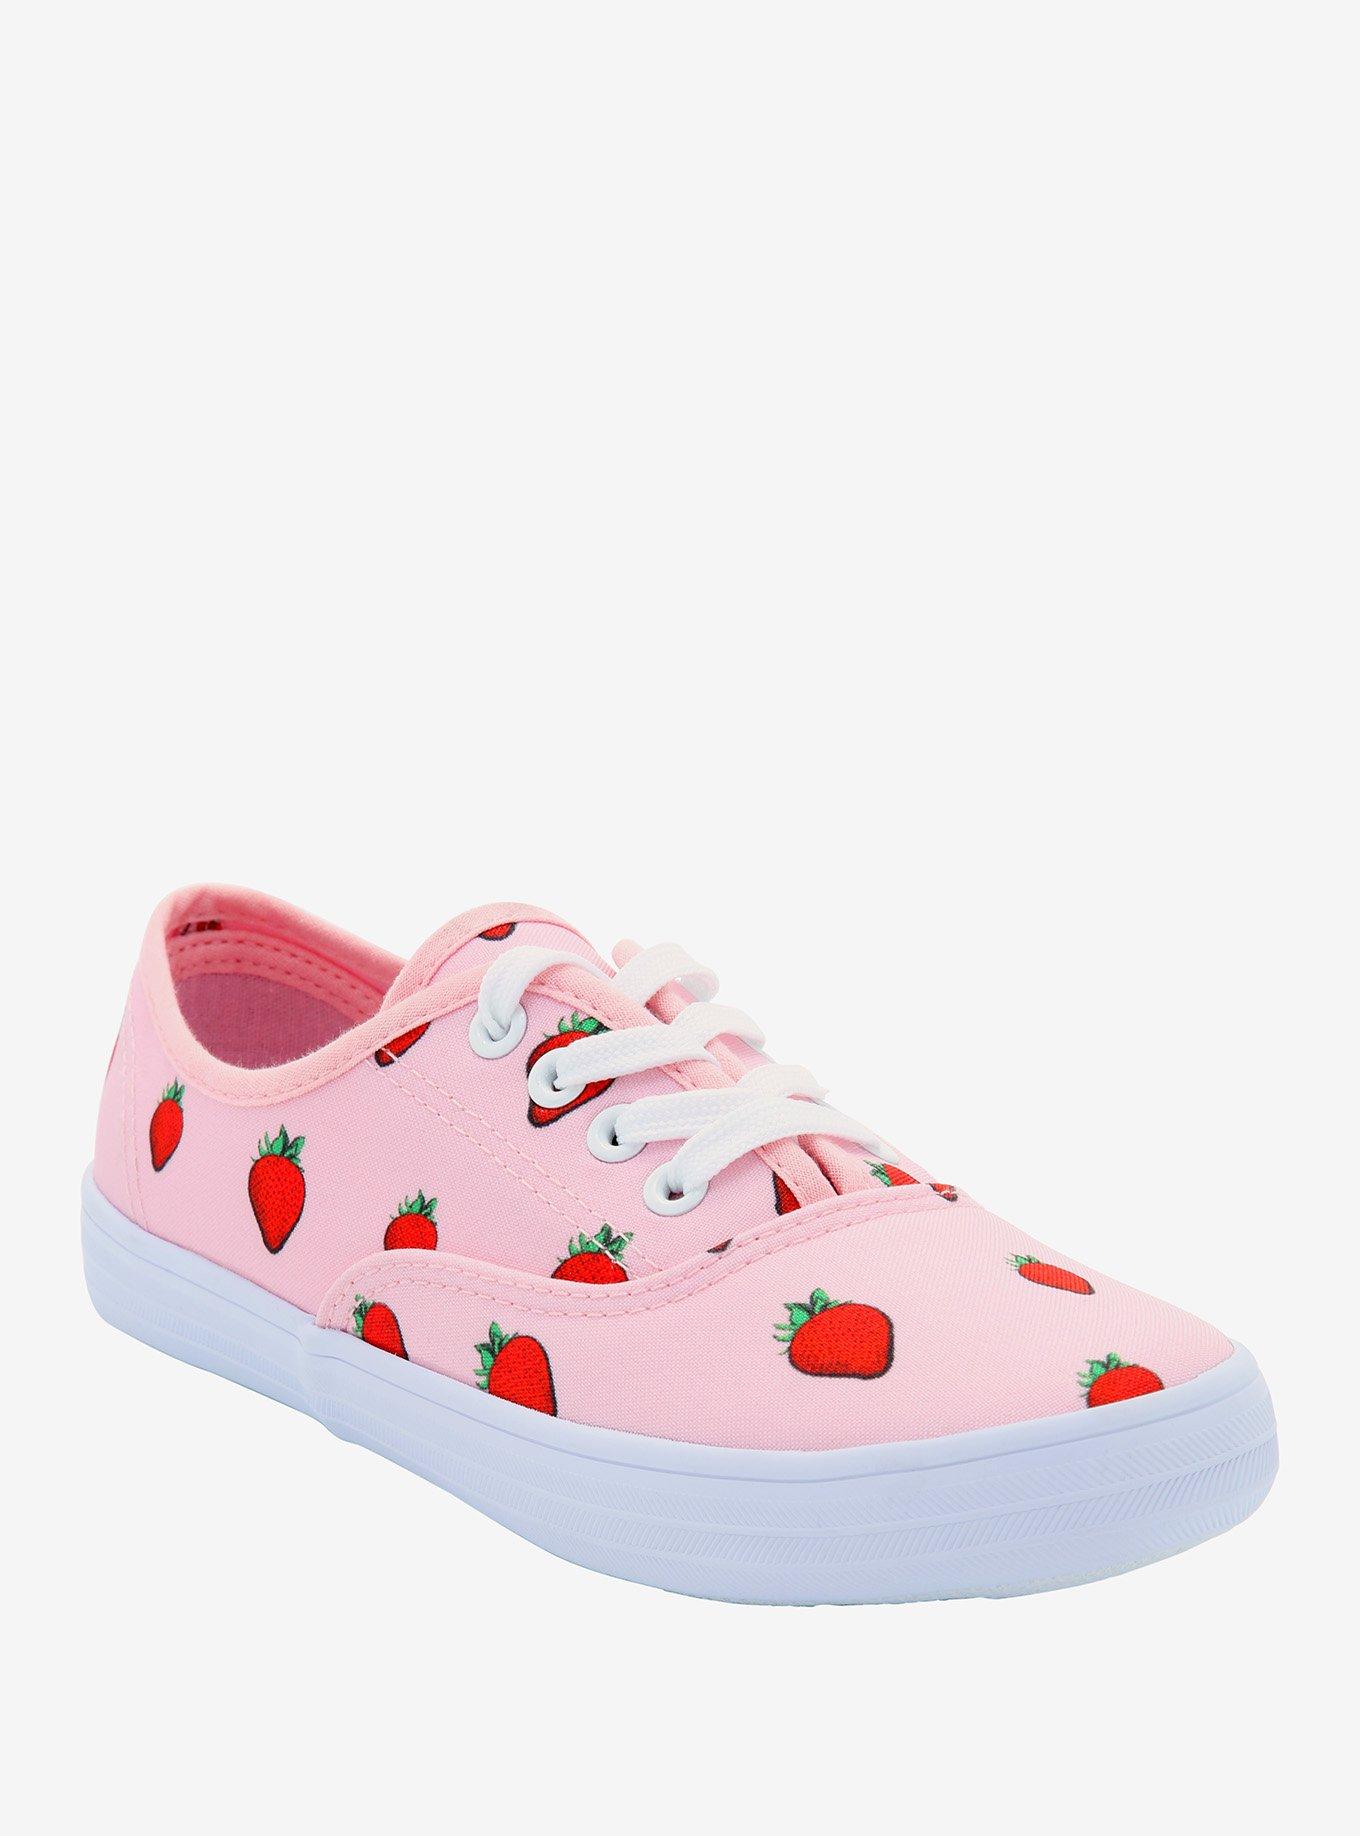 Strawberry Lace-Up Sneakers, MULTI, hi-res